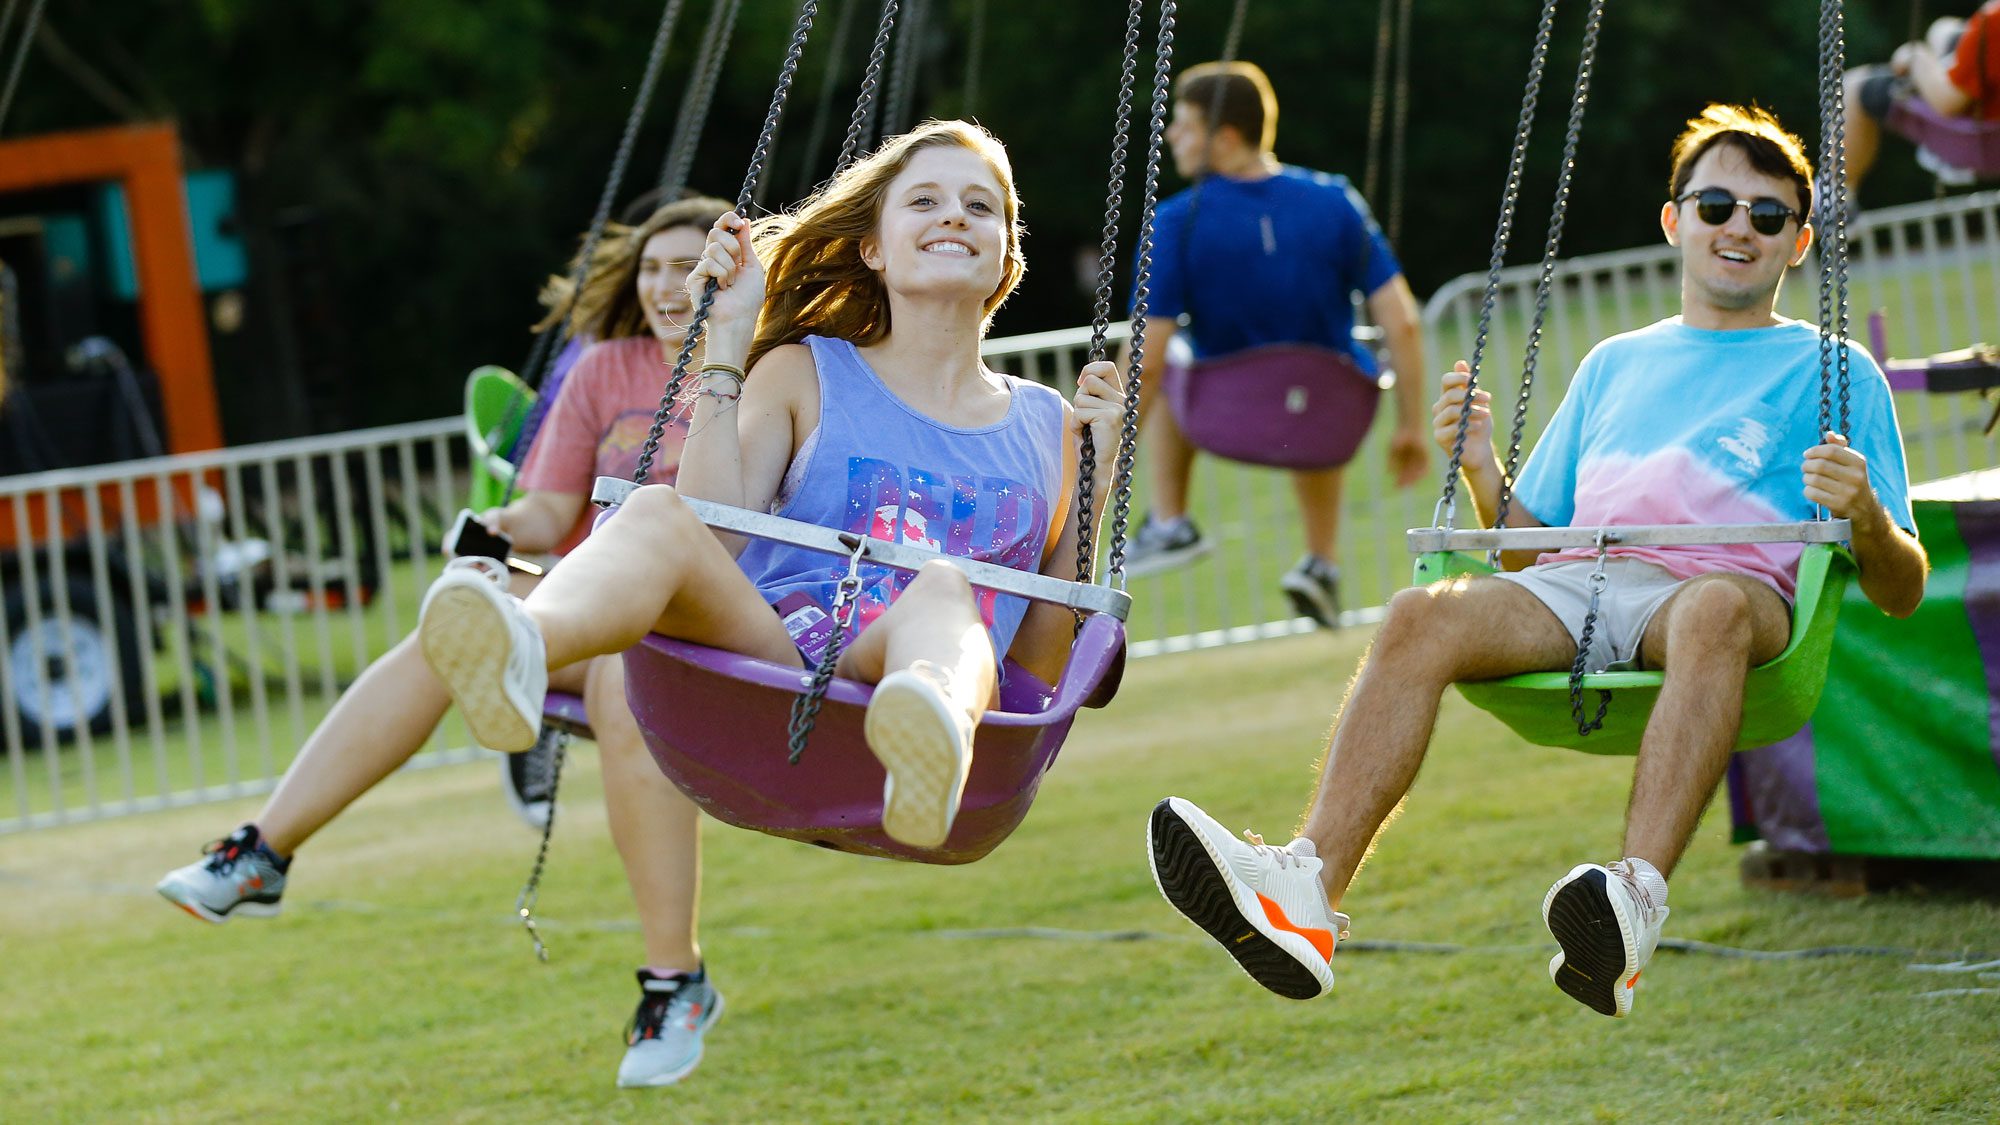 Students on a ride at the carnival